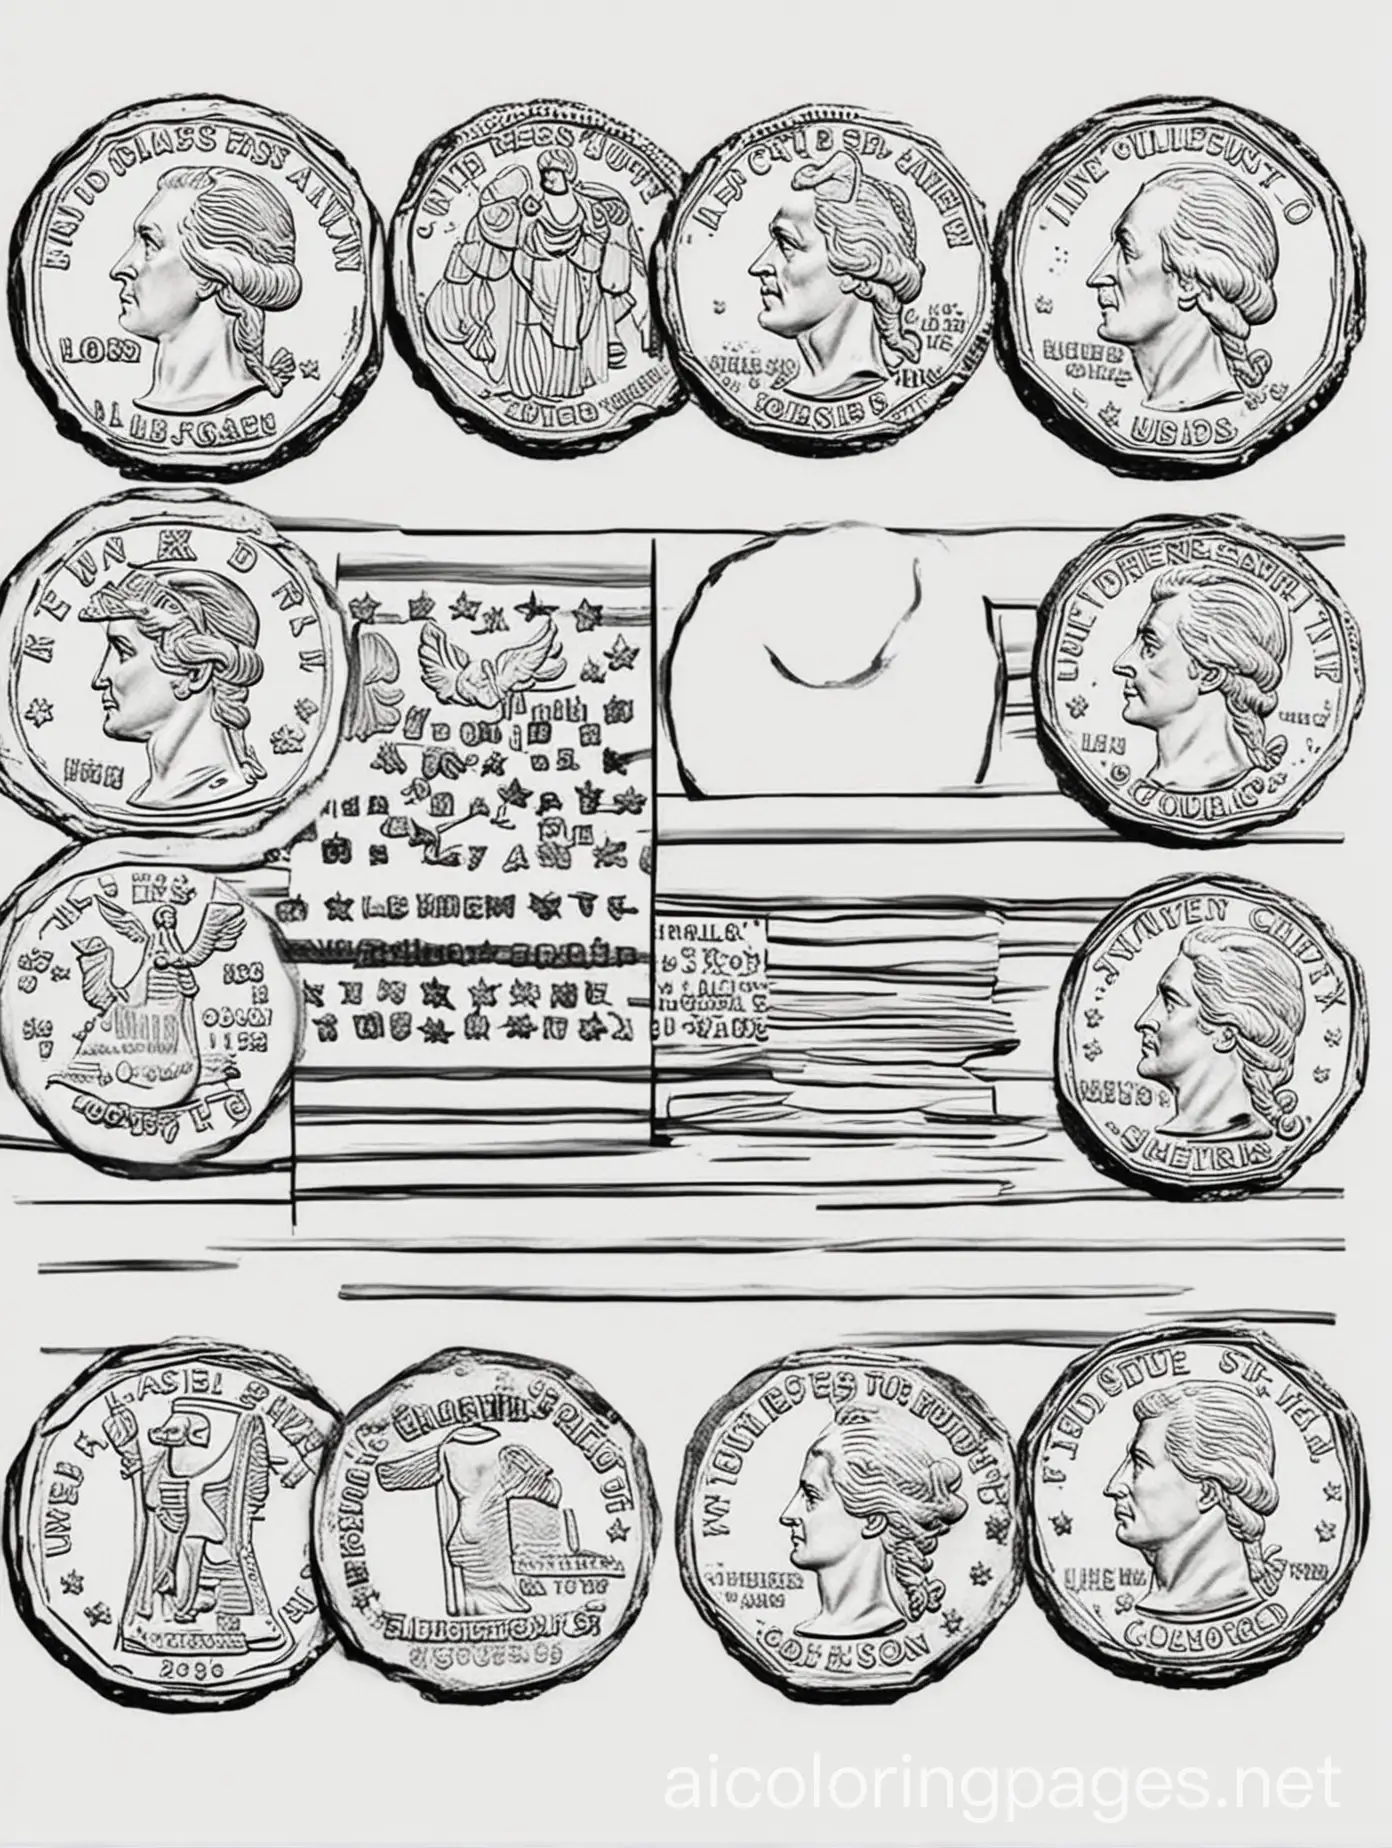 All U.S.A coins coloring image, Coloring Page, black and white, line art, white background, Simplicity, Ample White Space. The background of the coloring page is plain white to make it easy for young children to color within the lines. The outlines of all the subjects are easy to distinguish, making it simple for kids to color without too much difficulty